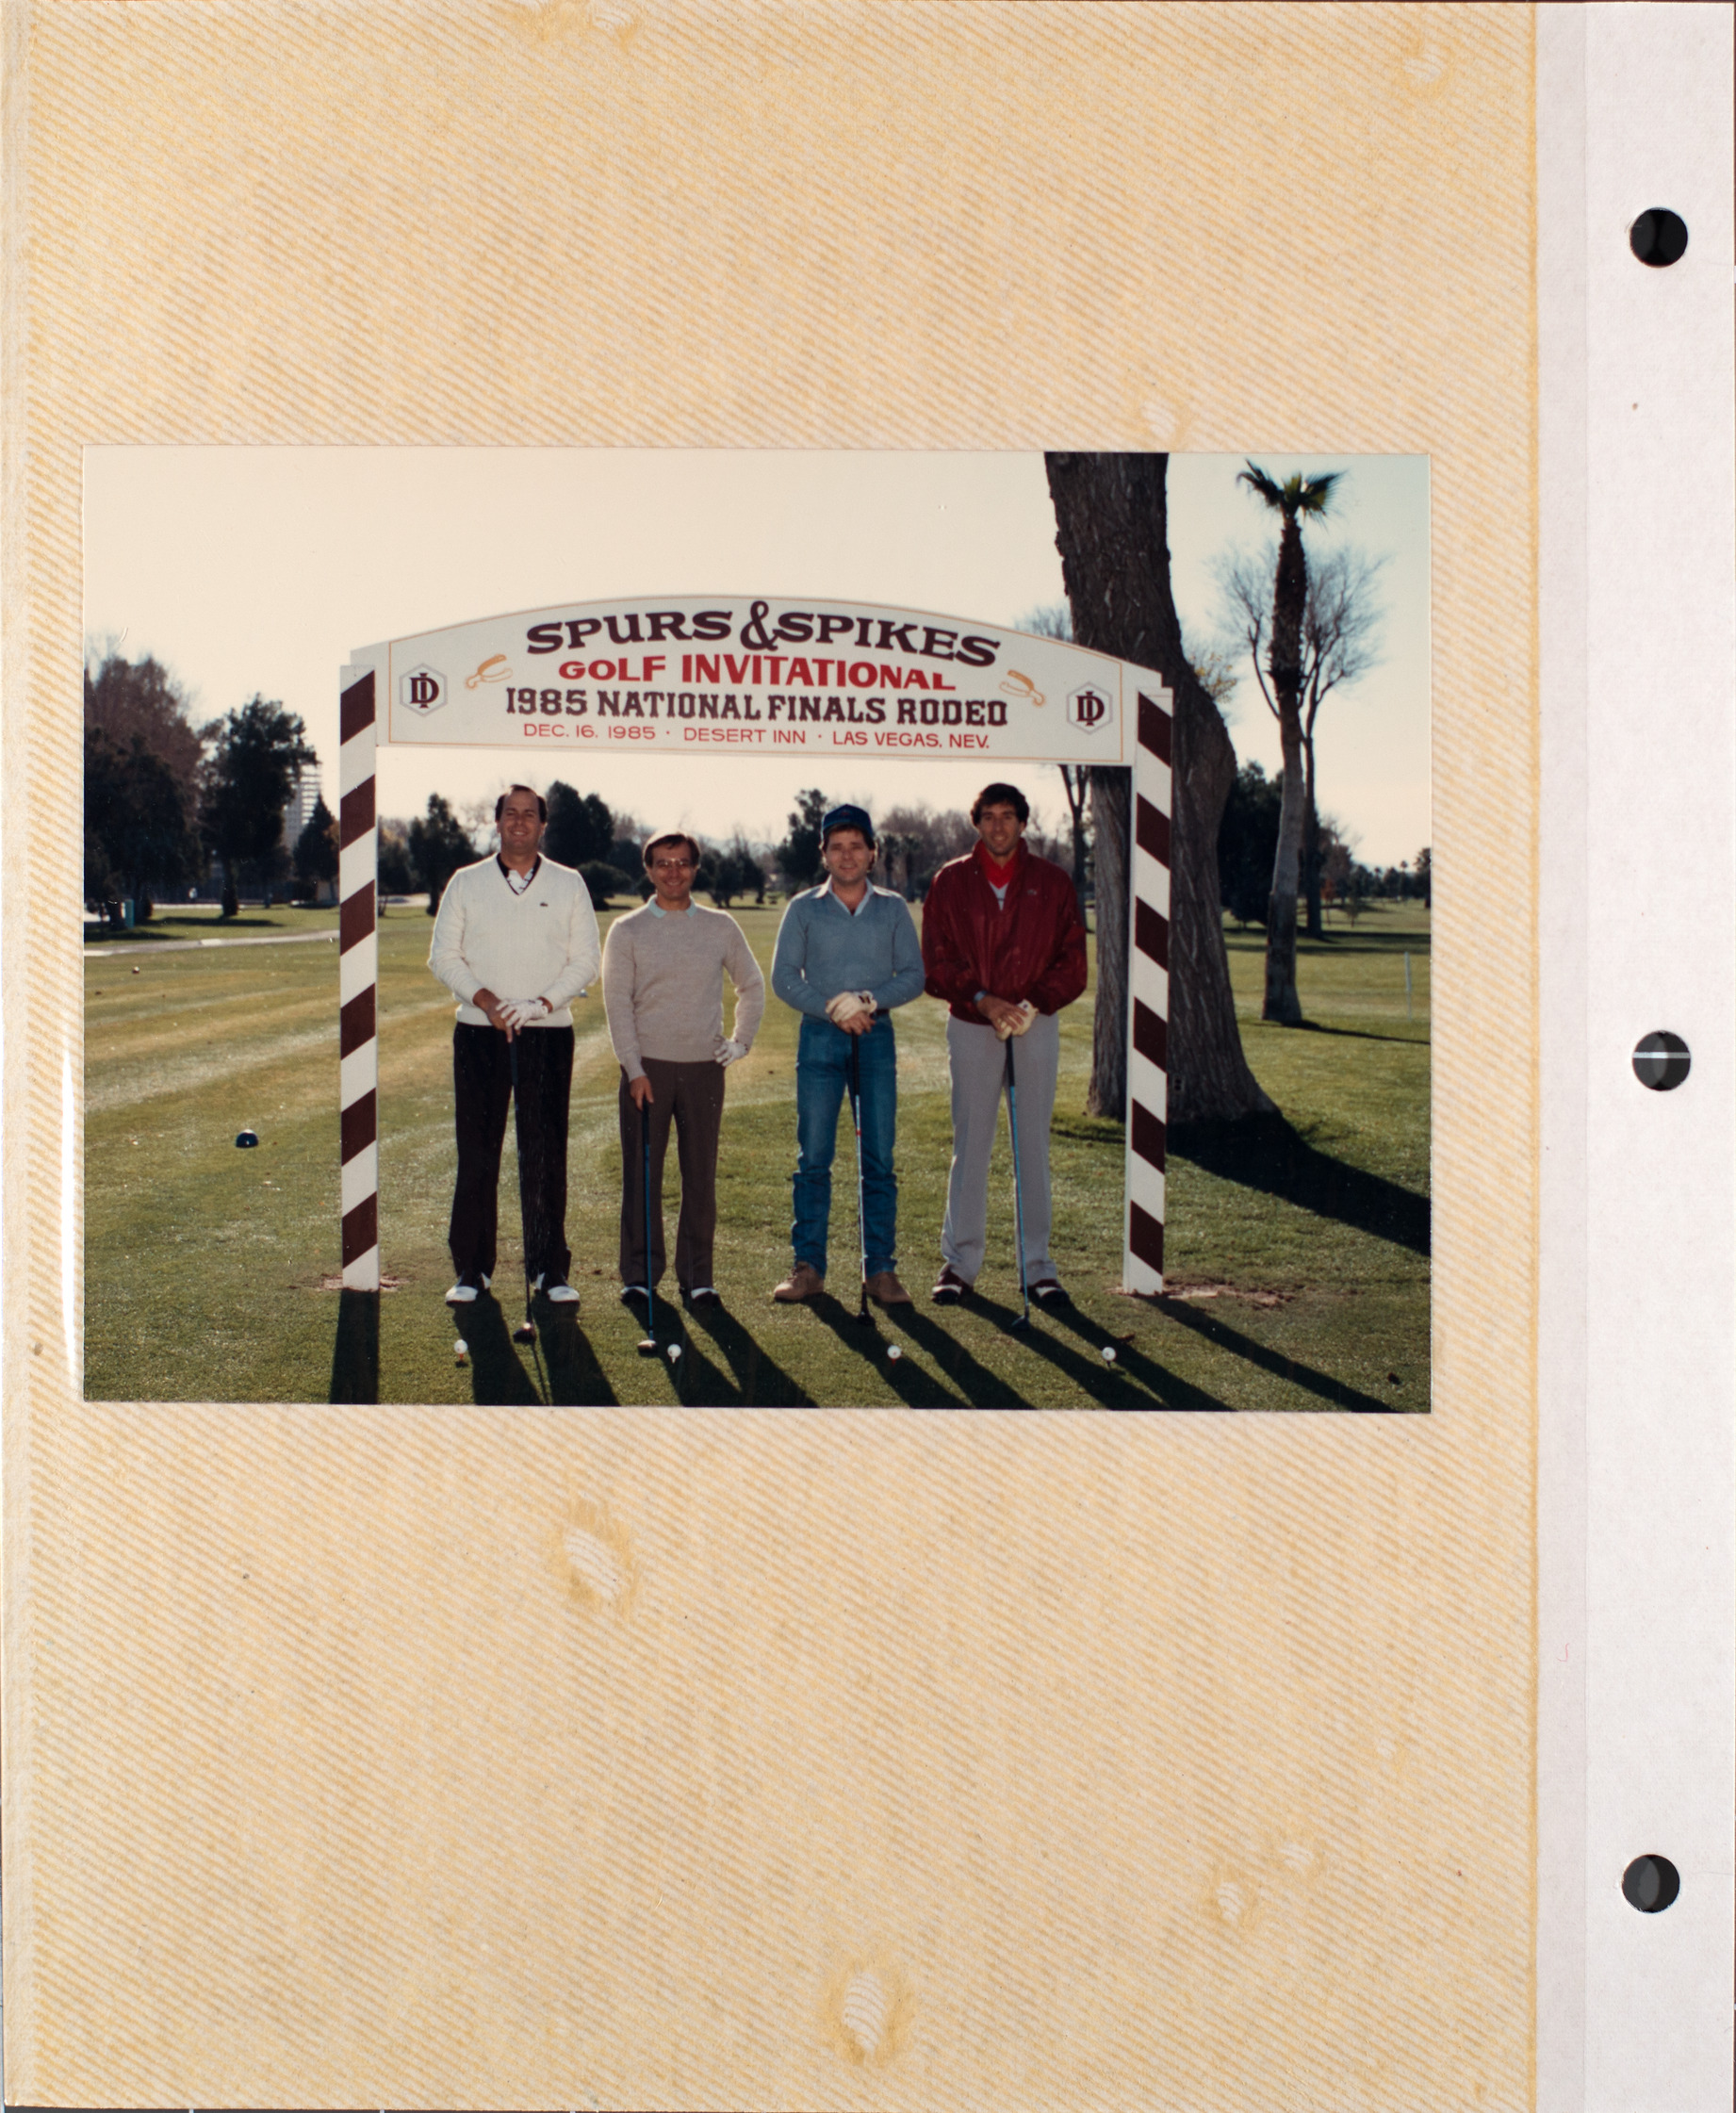 Photograph of Mark Fine and others at the Spurs & Spikes golf invitational, December 16, 1985